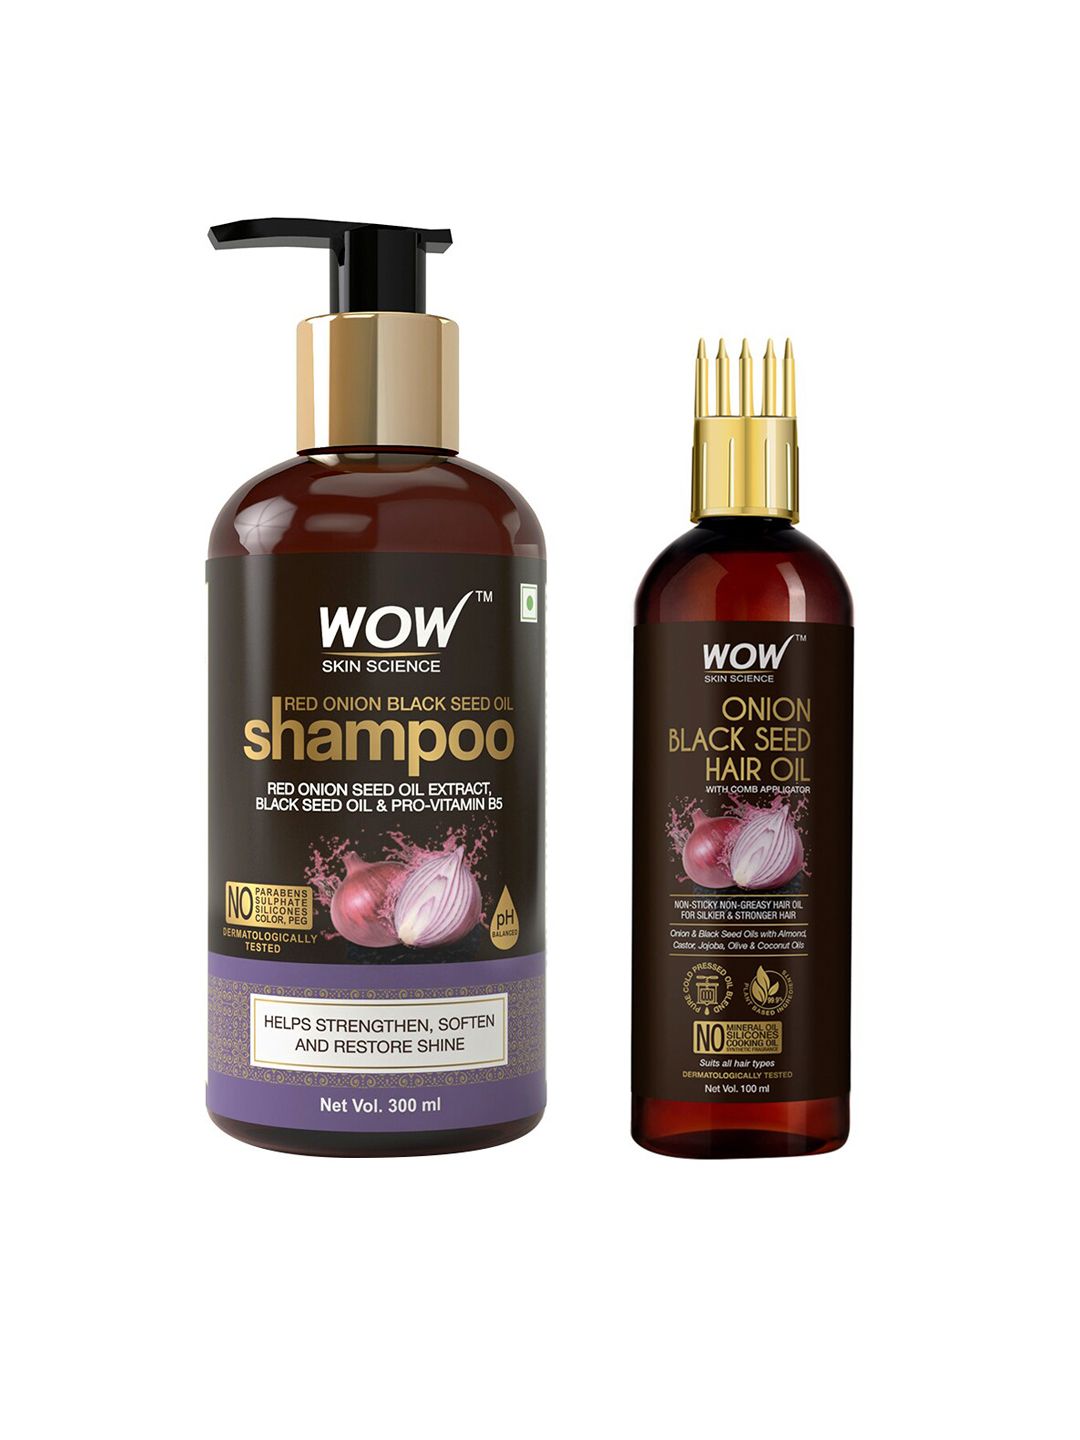 WOW SKIN SCIENCE Set of Onion Black Seed Hair Oil with Comb Applicator & Shampoo Price in India